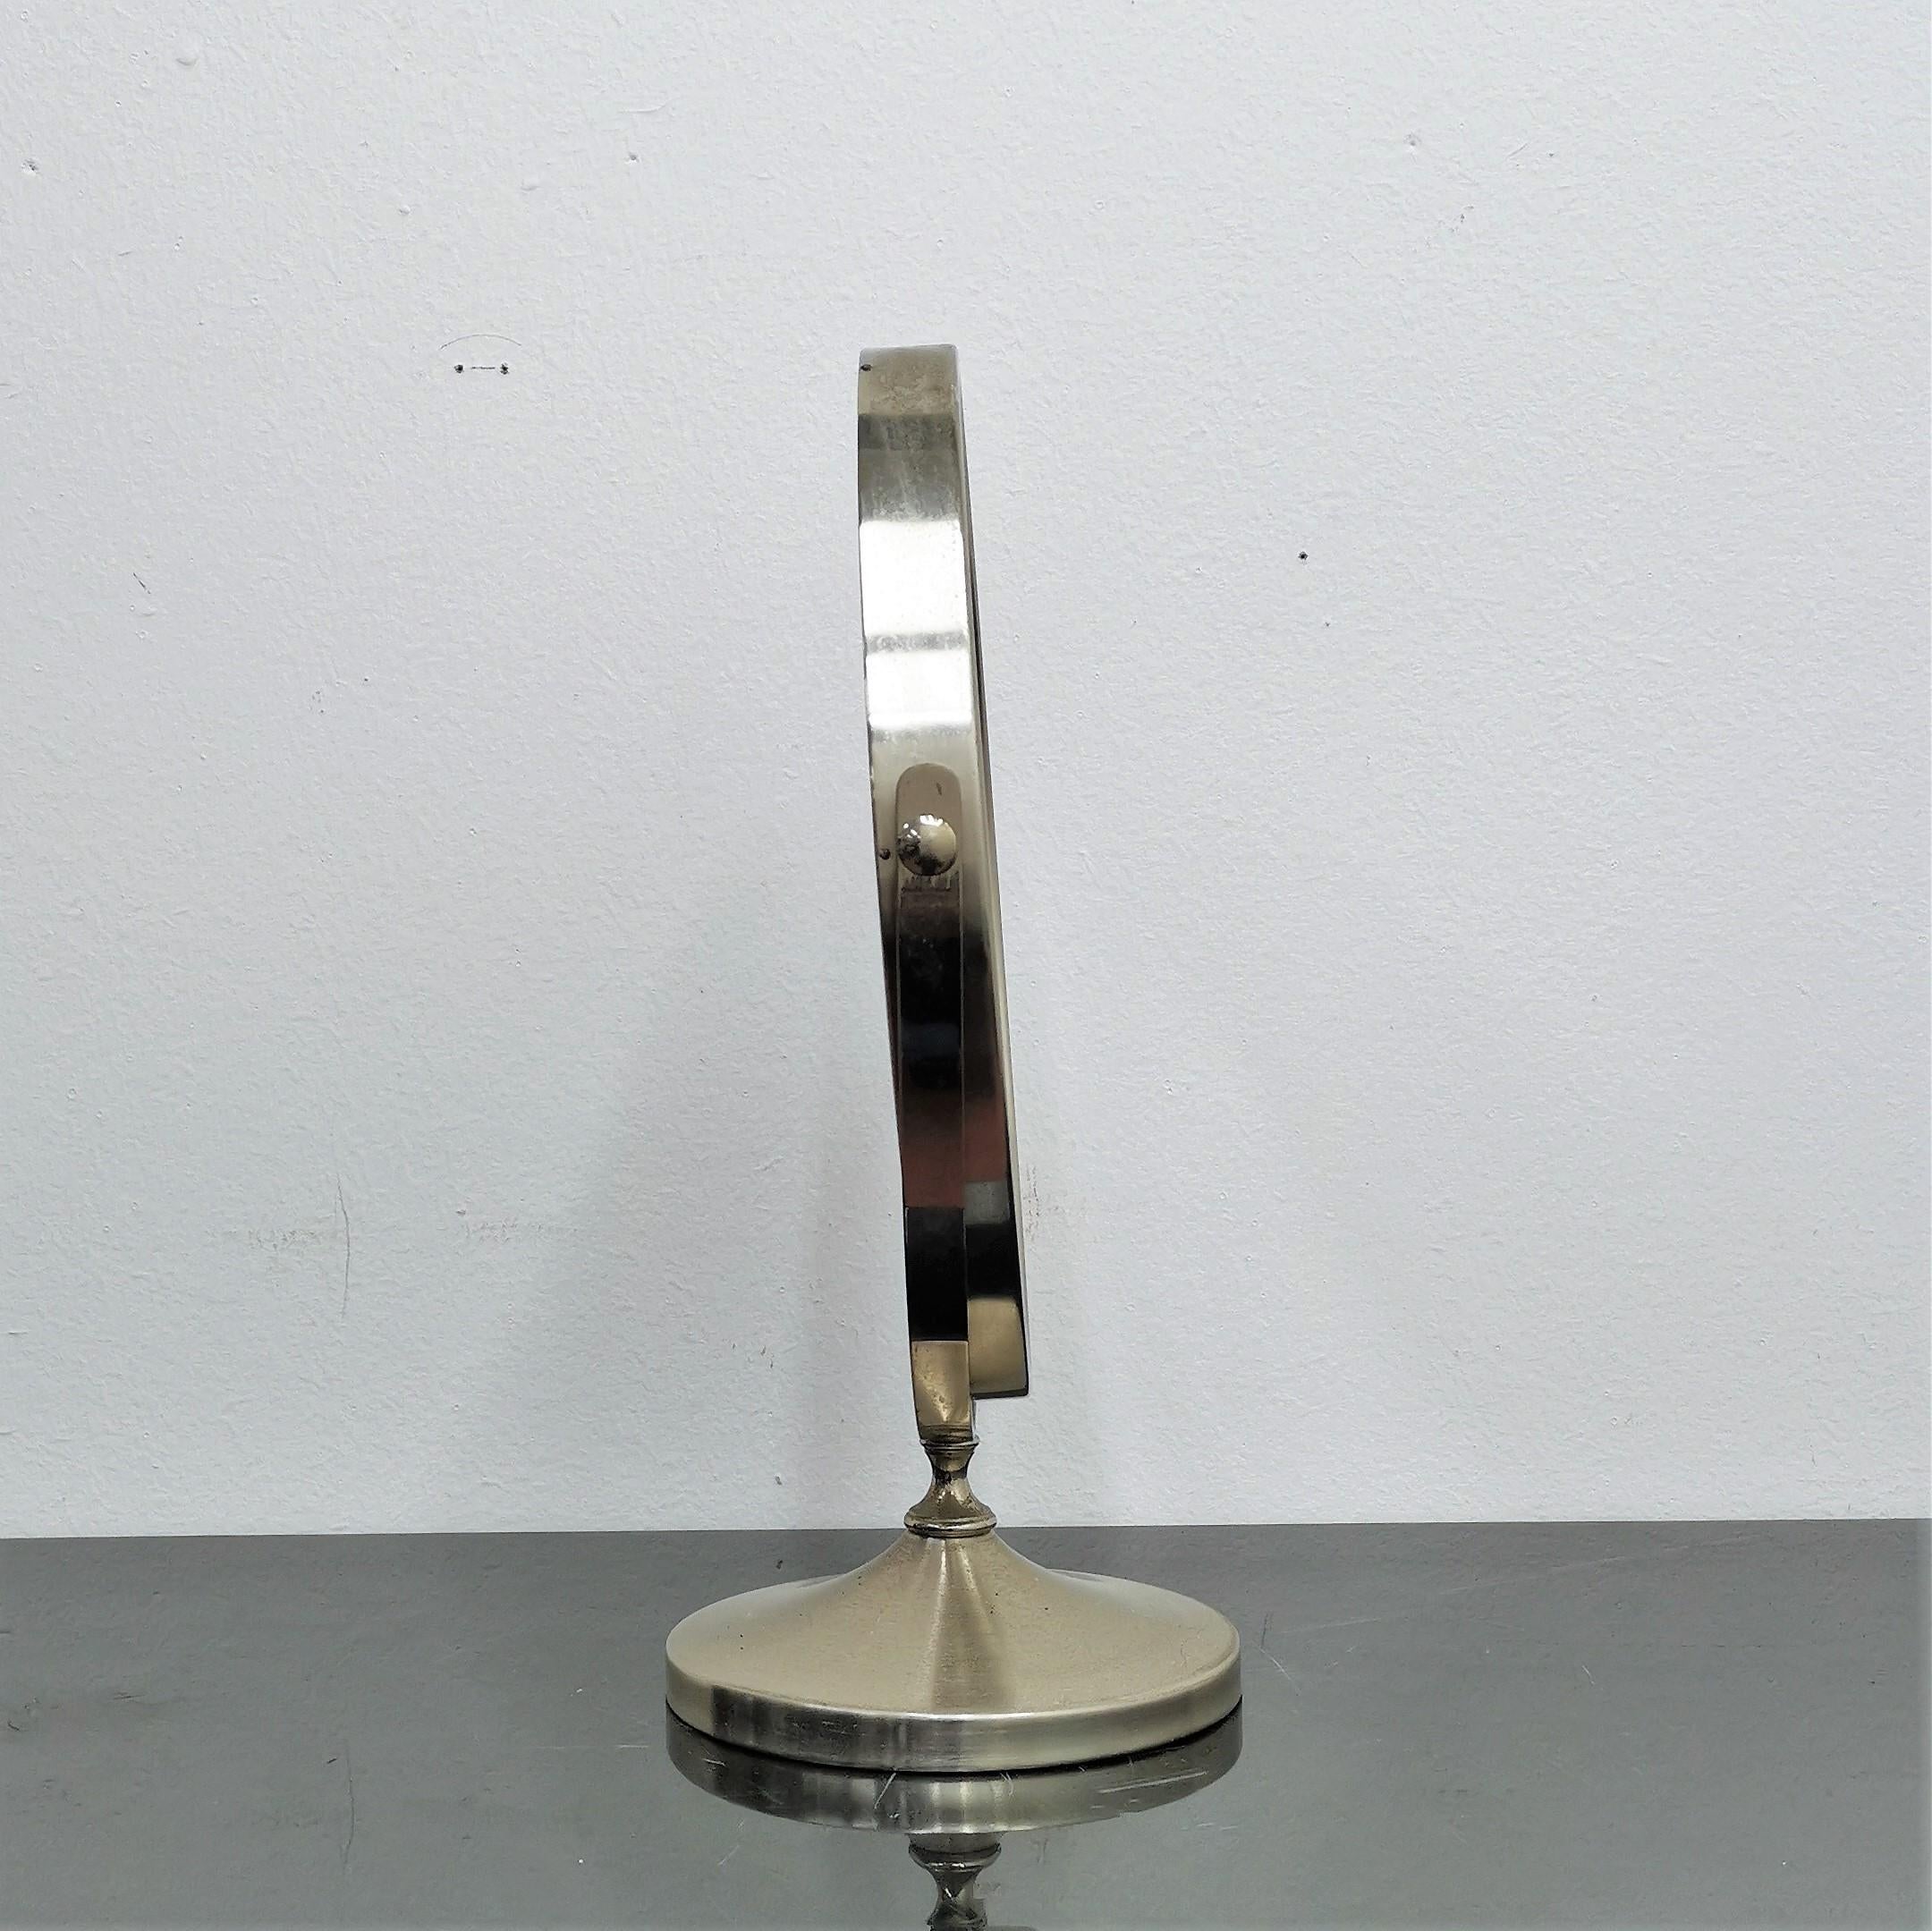 Tilting table mirror in nickel-plated brass Narciso model to Sergio Mazza for Artemide around 1960. Original patina.
Wear consistent with age and use.